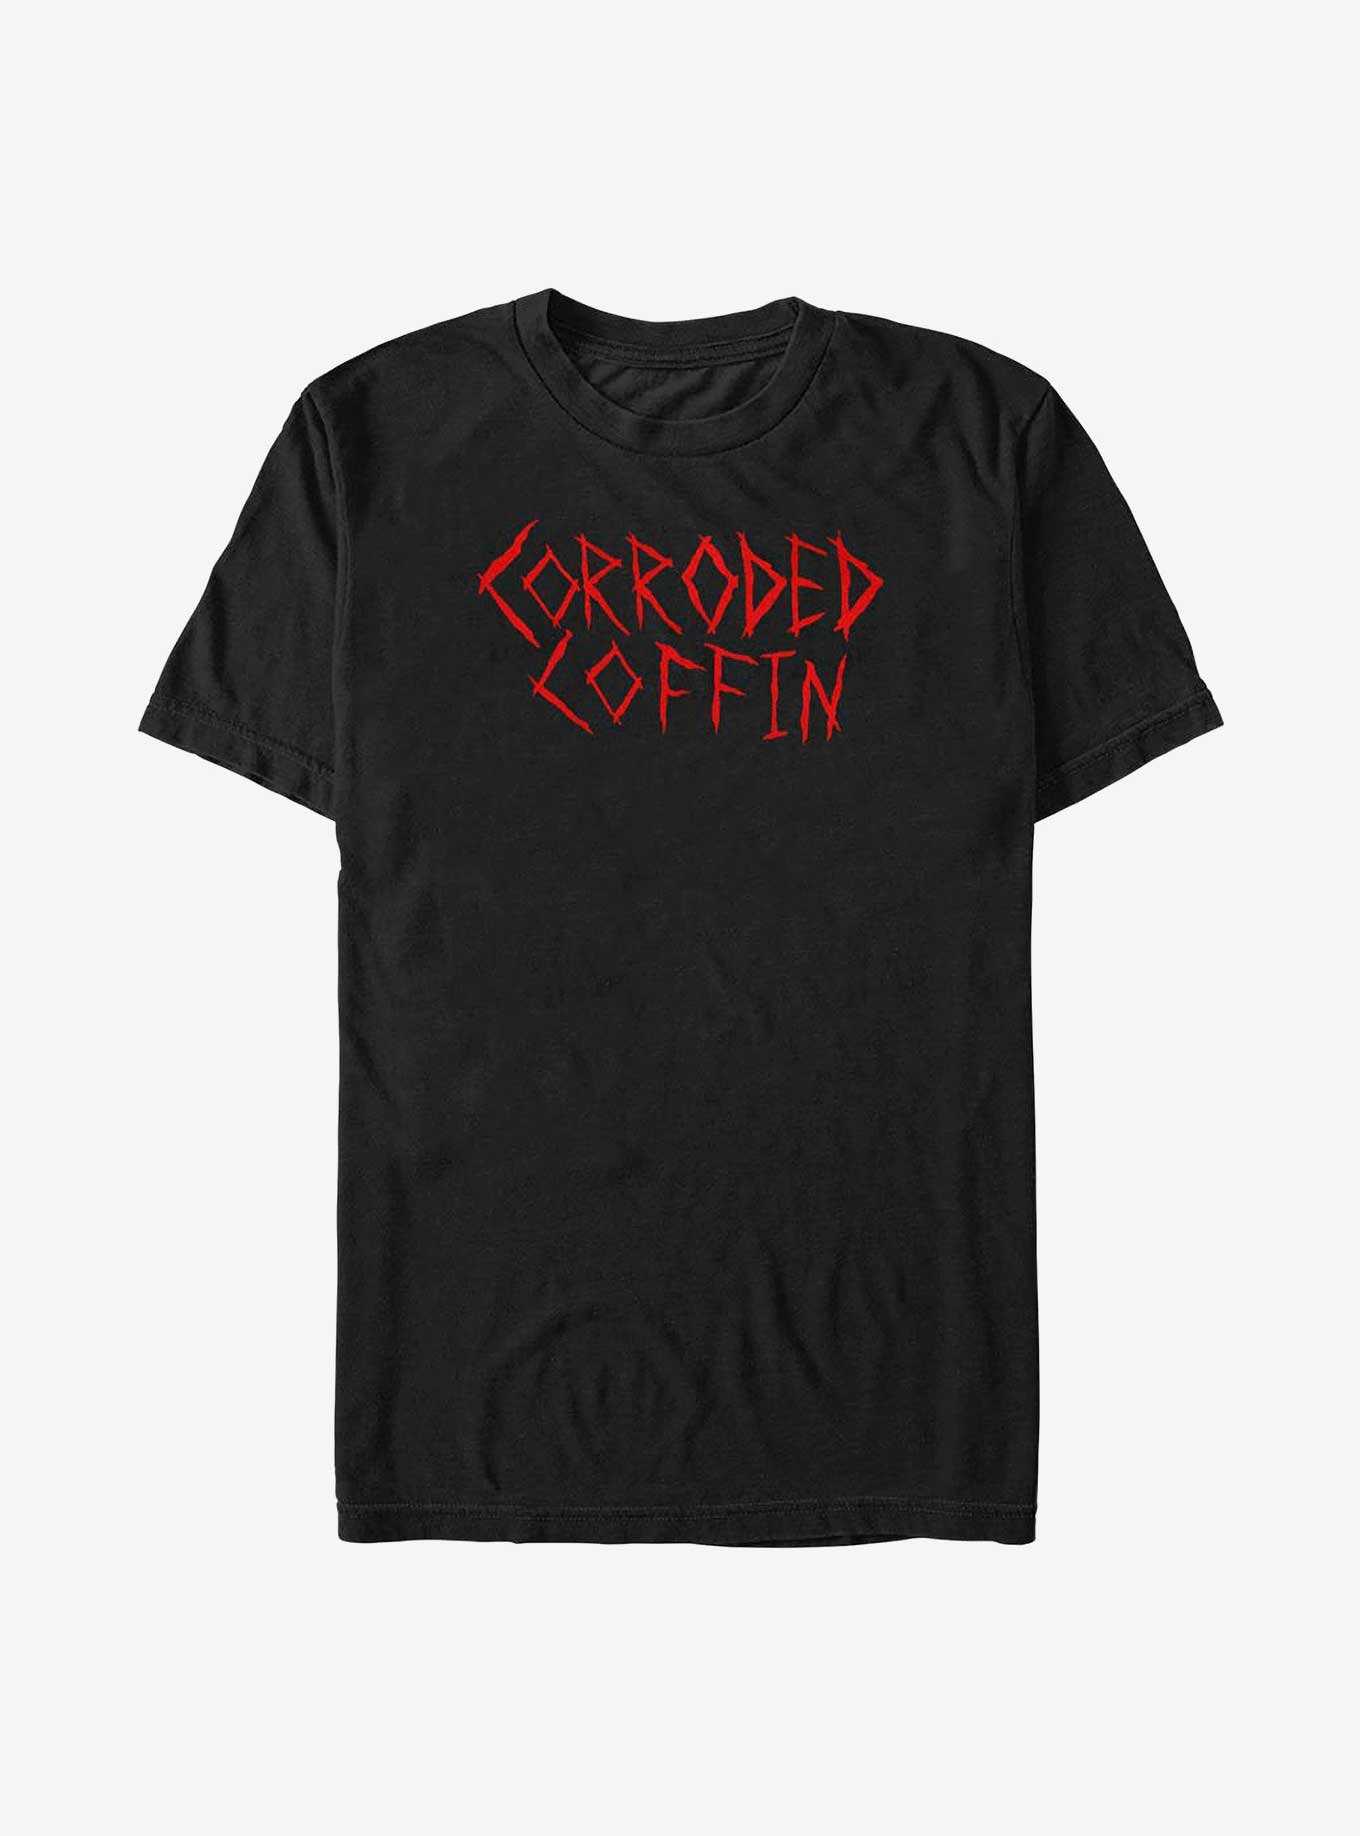 Stranger Things Corroded Coffin Big & Tall T-Shirt, , hi-res